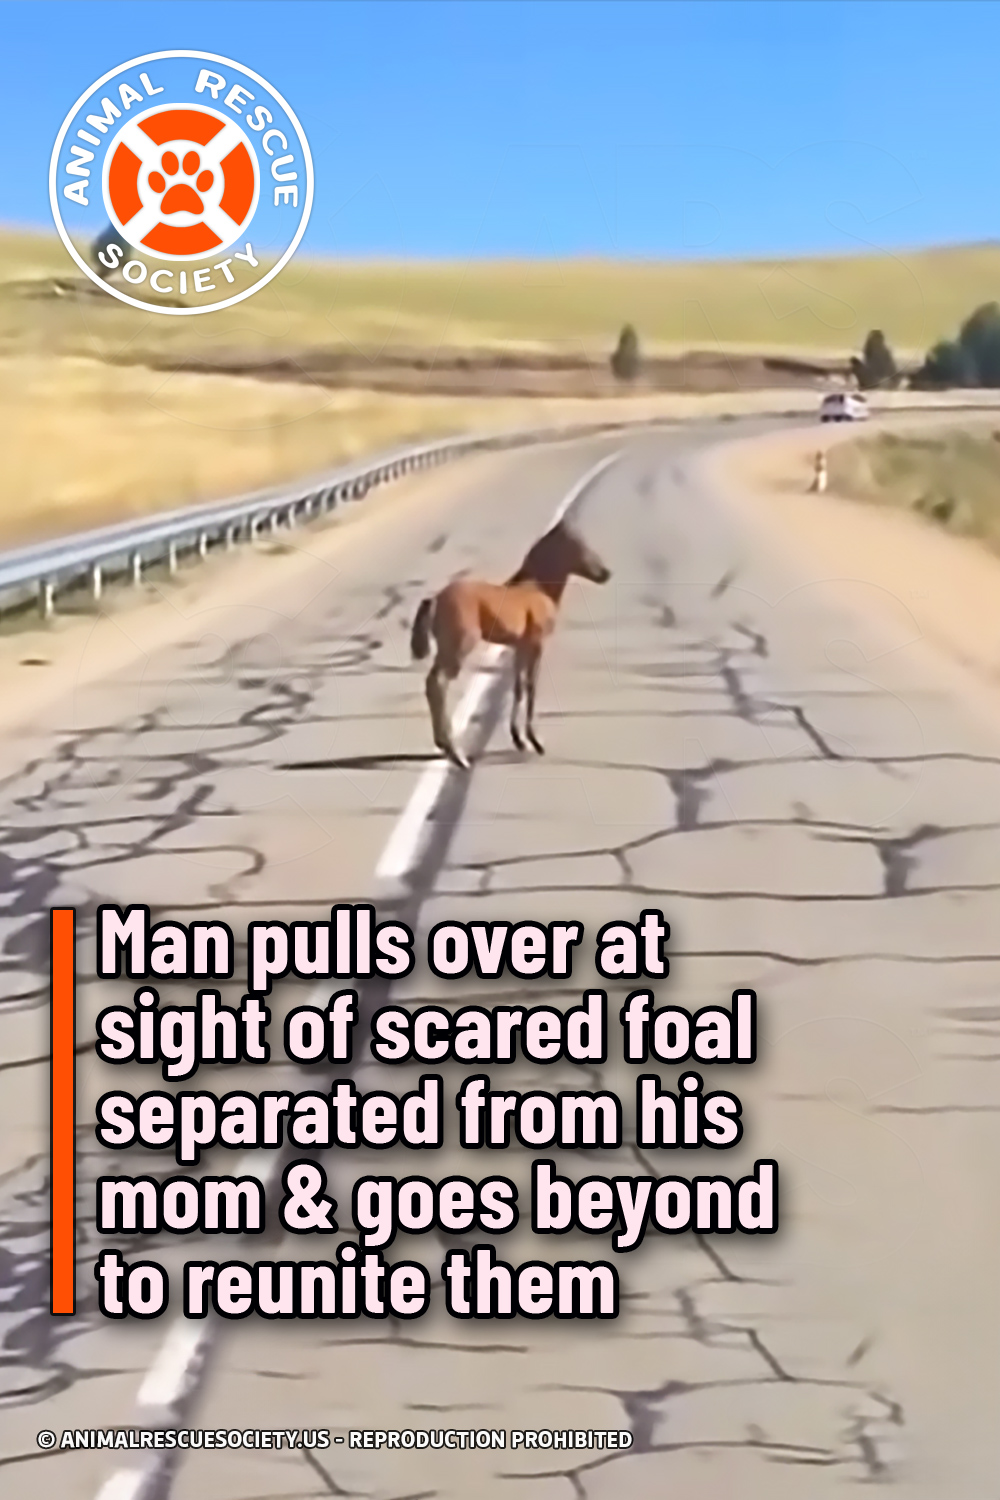 Man pulls over at sight of scared foal separated from his mom & goes beyond to reunite them